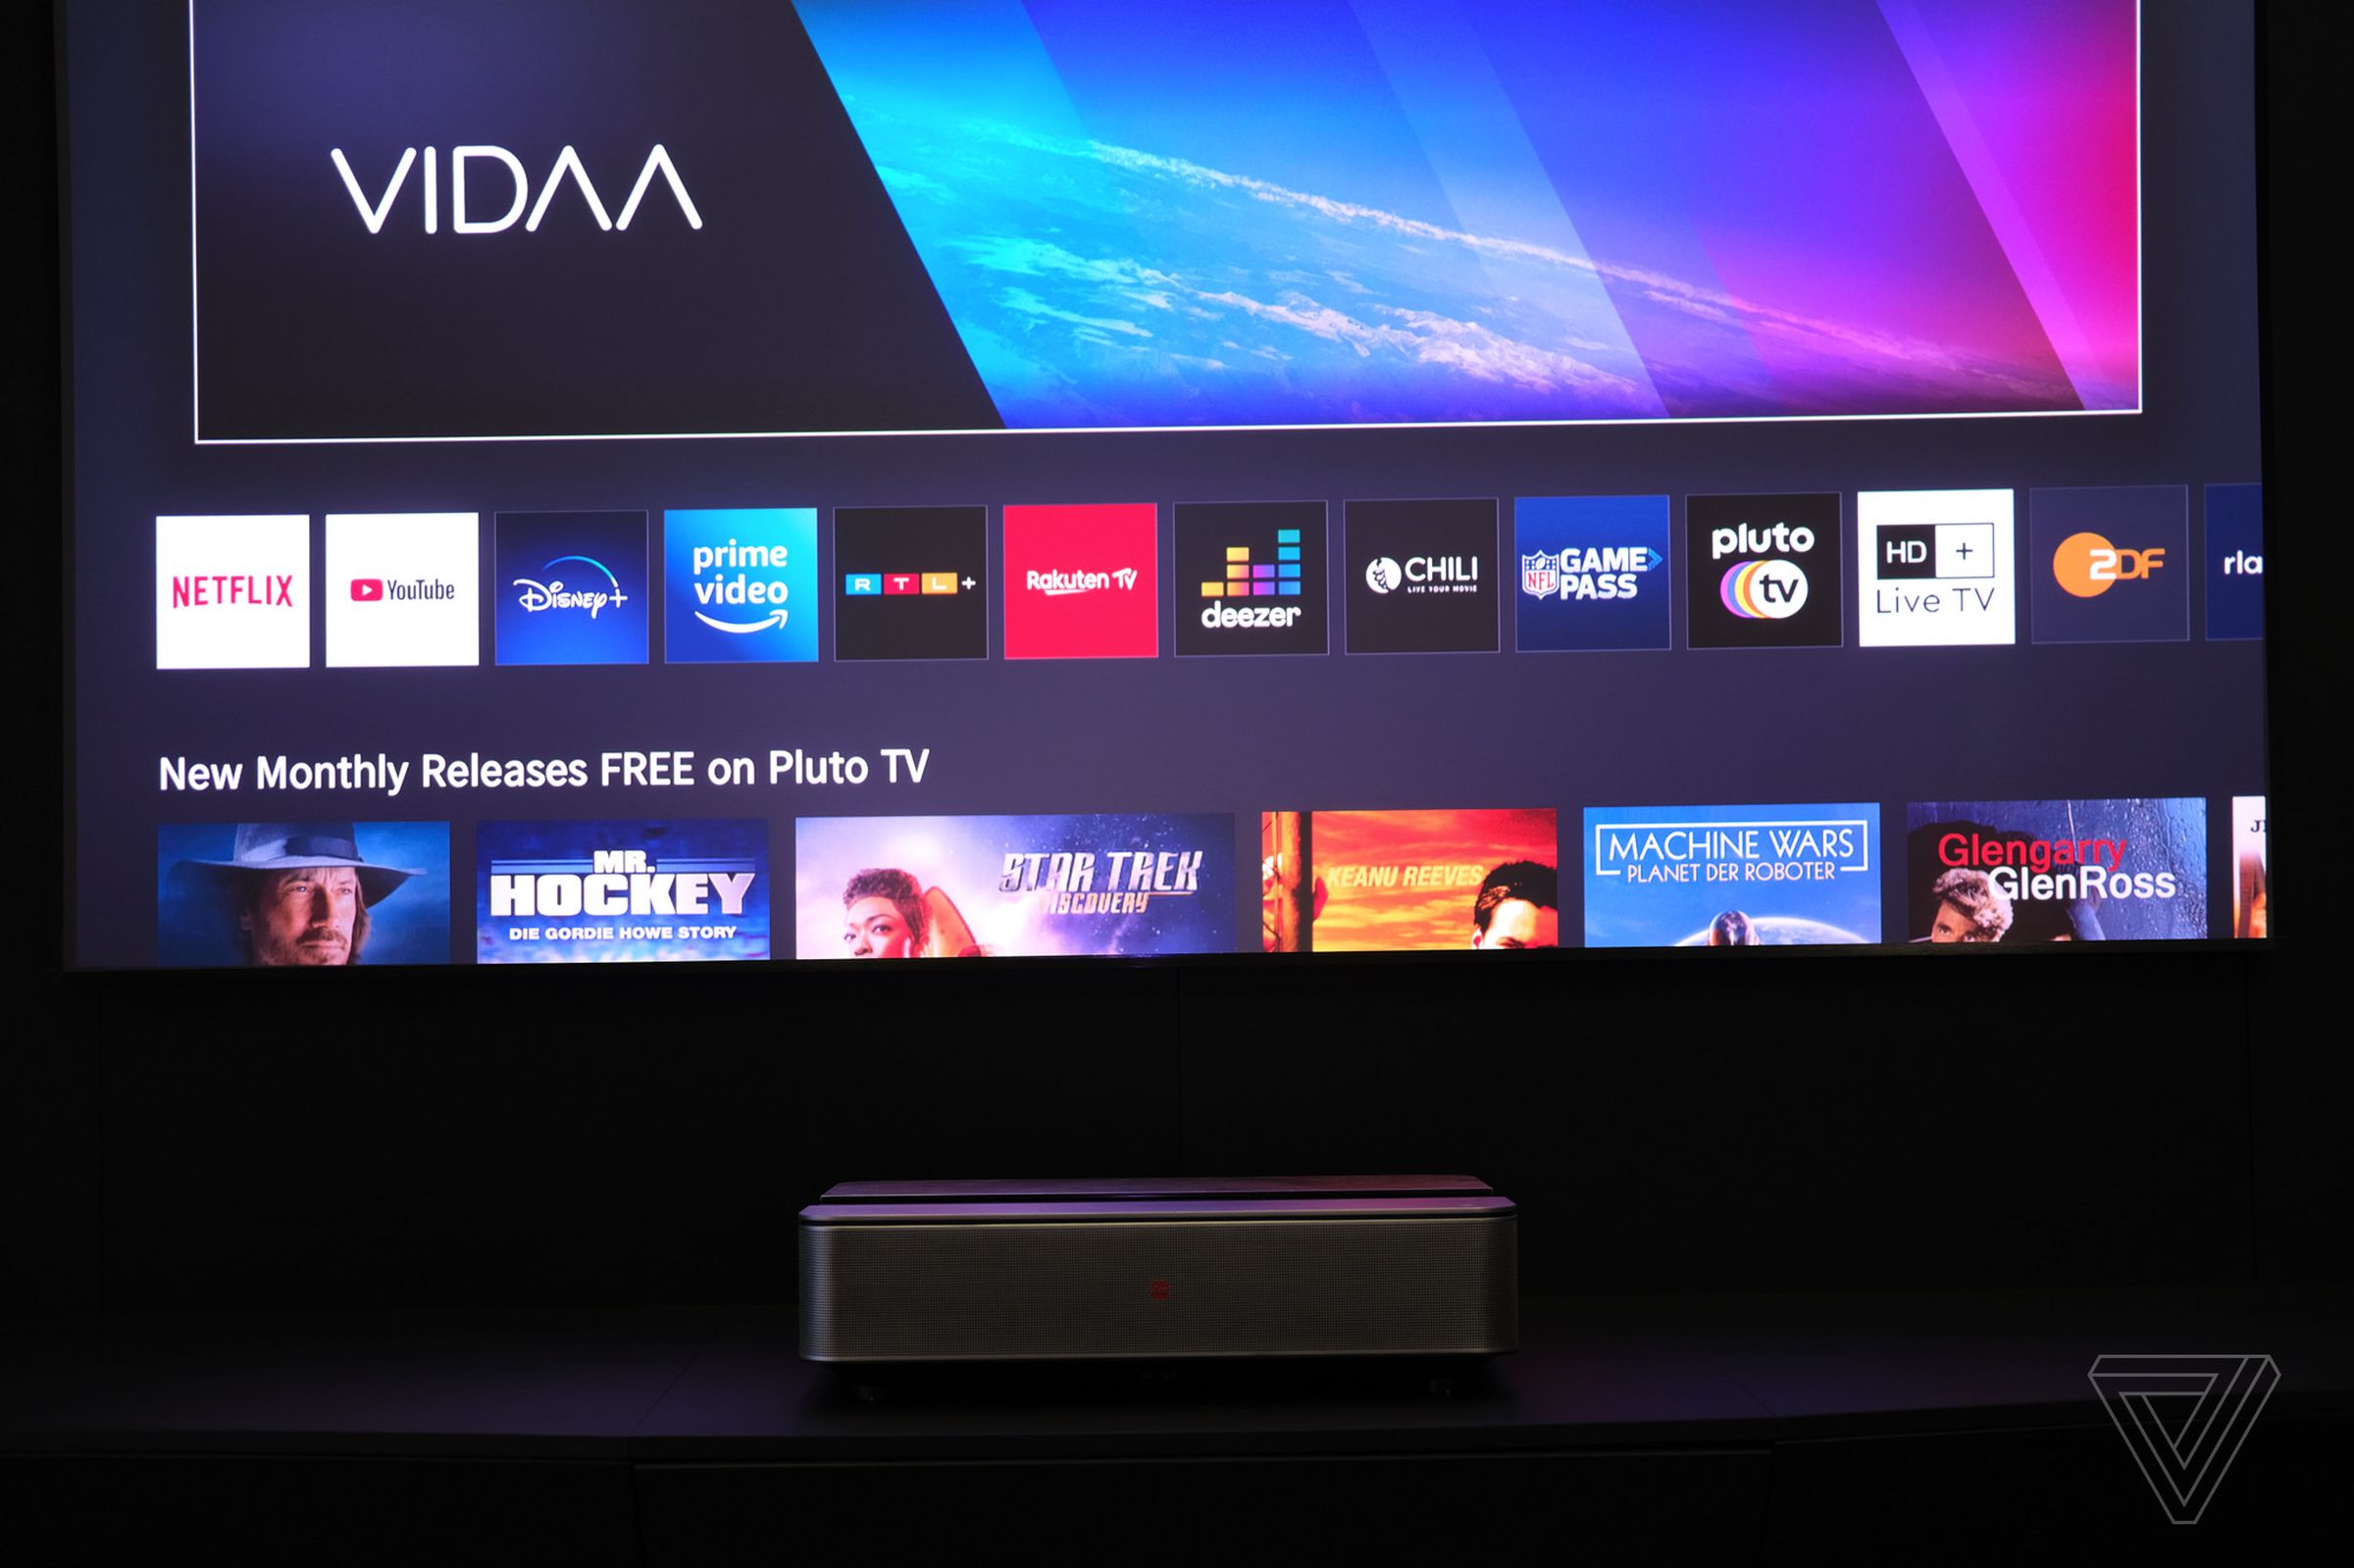 <em>Might run Vidaa in Europe and Android TV in the US.</em>